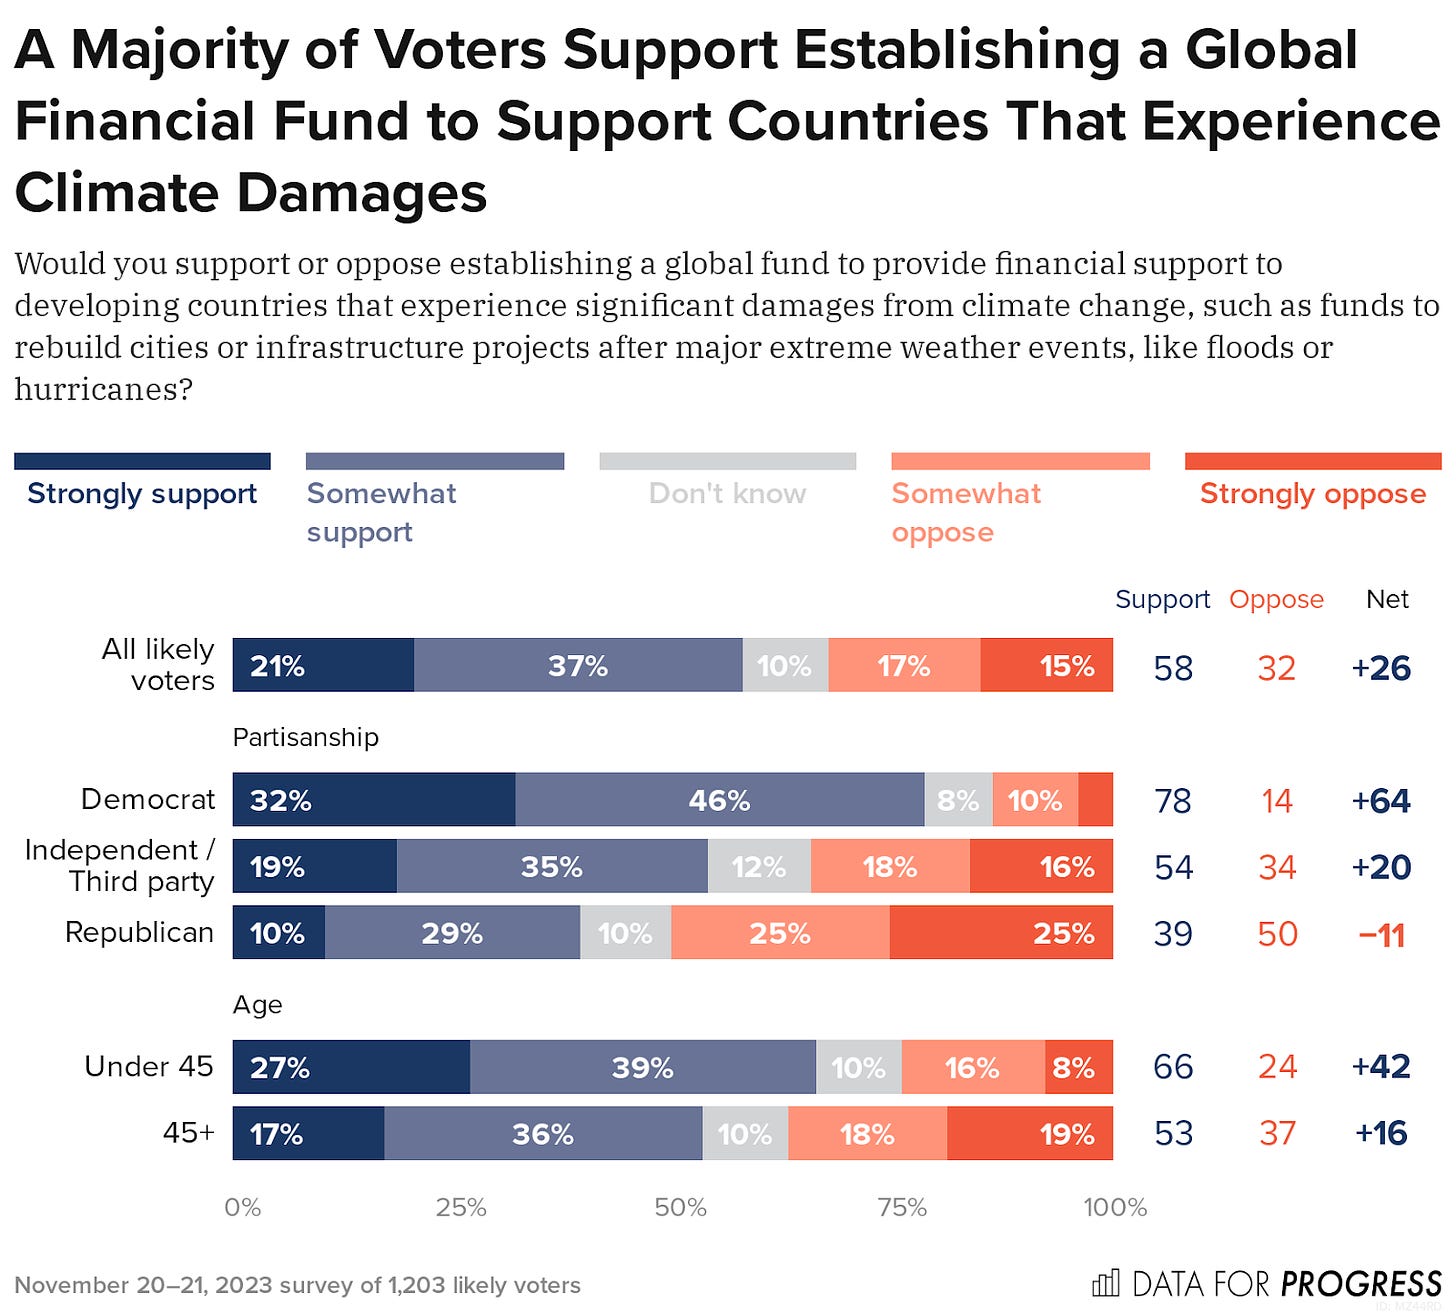 Bar chart of polling data from Data For Progress. Title: A Majority of Voters Support Establishing a Global Financial Fund to Support Countries That Experience Climate Damages. Description: Would you support or oppose establishing a global fund to provide financial support to developing countries that experience significant damages from climate change, such as funds to rebuild cities or infrastructure projects after major extreme weather events, like floods or hurricanes? All likely voters — Support: 58%, Oppose: 32% Democrat — Support: 79%, Oppose: 14% Independent / Third party — Support: 54%, Oppose: 34% Republican — Support: 40%, Oppose: 50% Under 45 — Support: 66%, Oppose: 24% 45+ — Support: 53%, Oppose: 37%  November 20–21, 2023 survey of 1,203 likely voters.